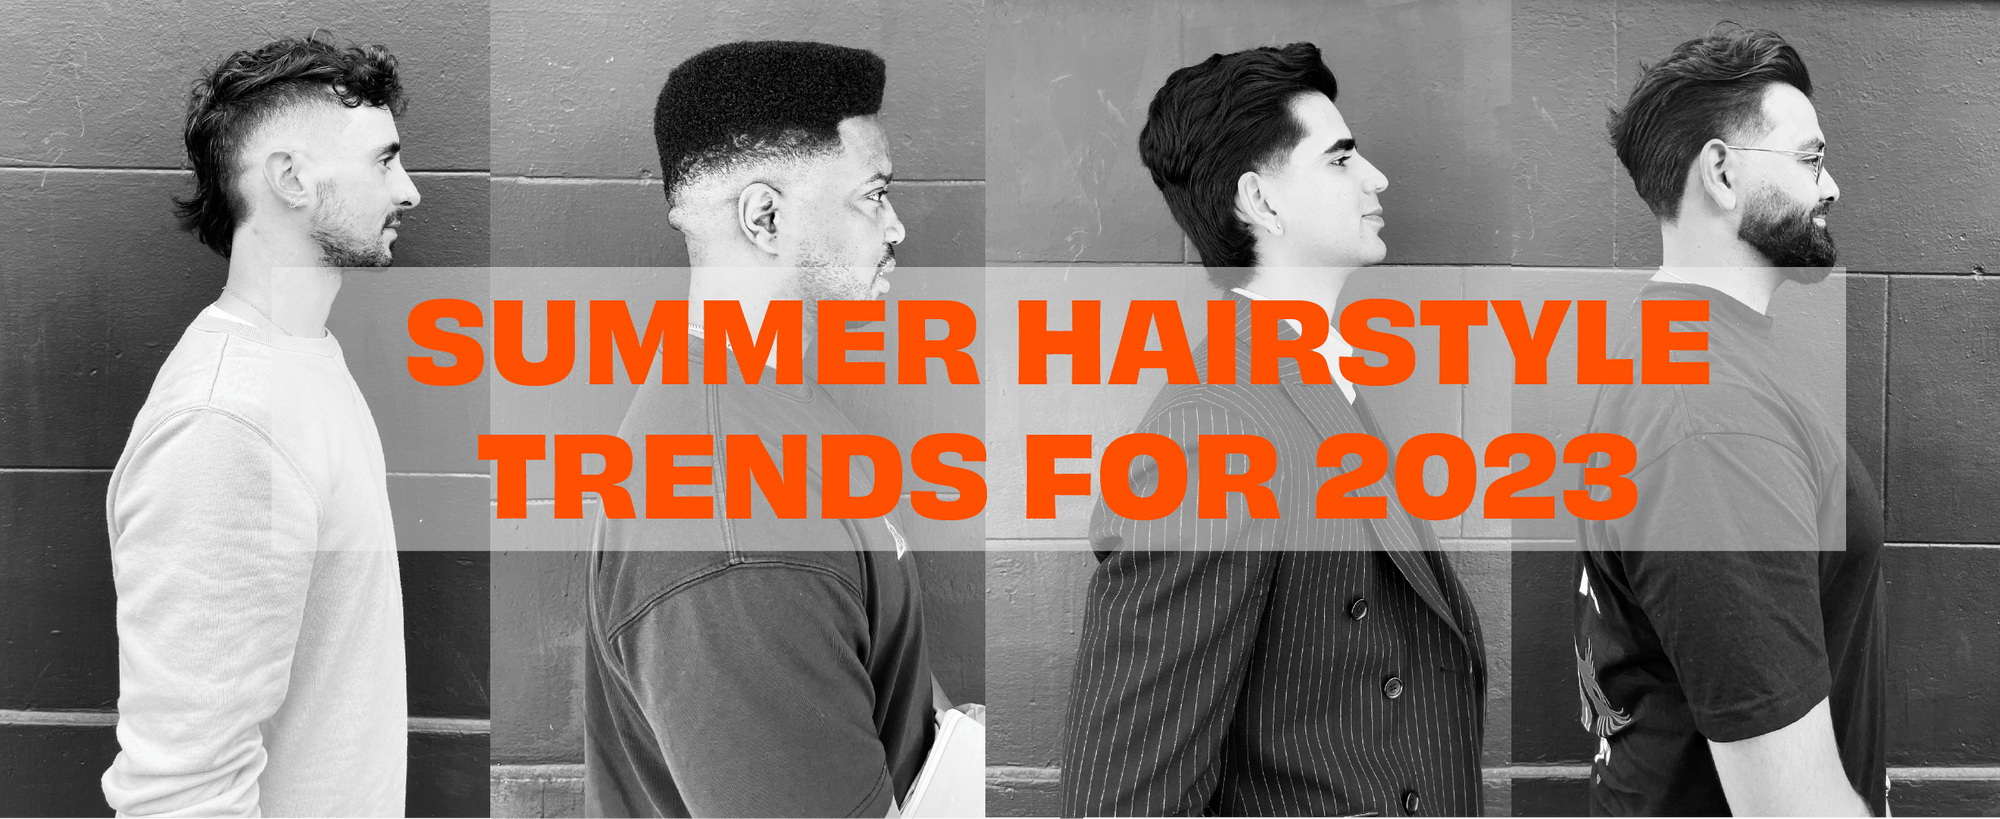 2023 Summer Hairstyle Trends for Men